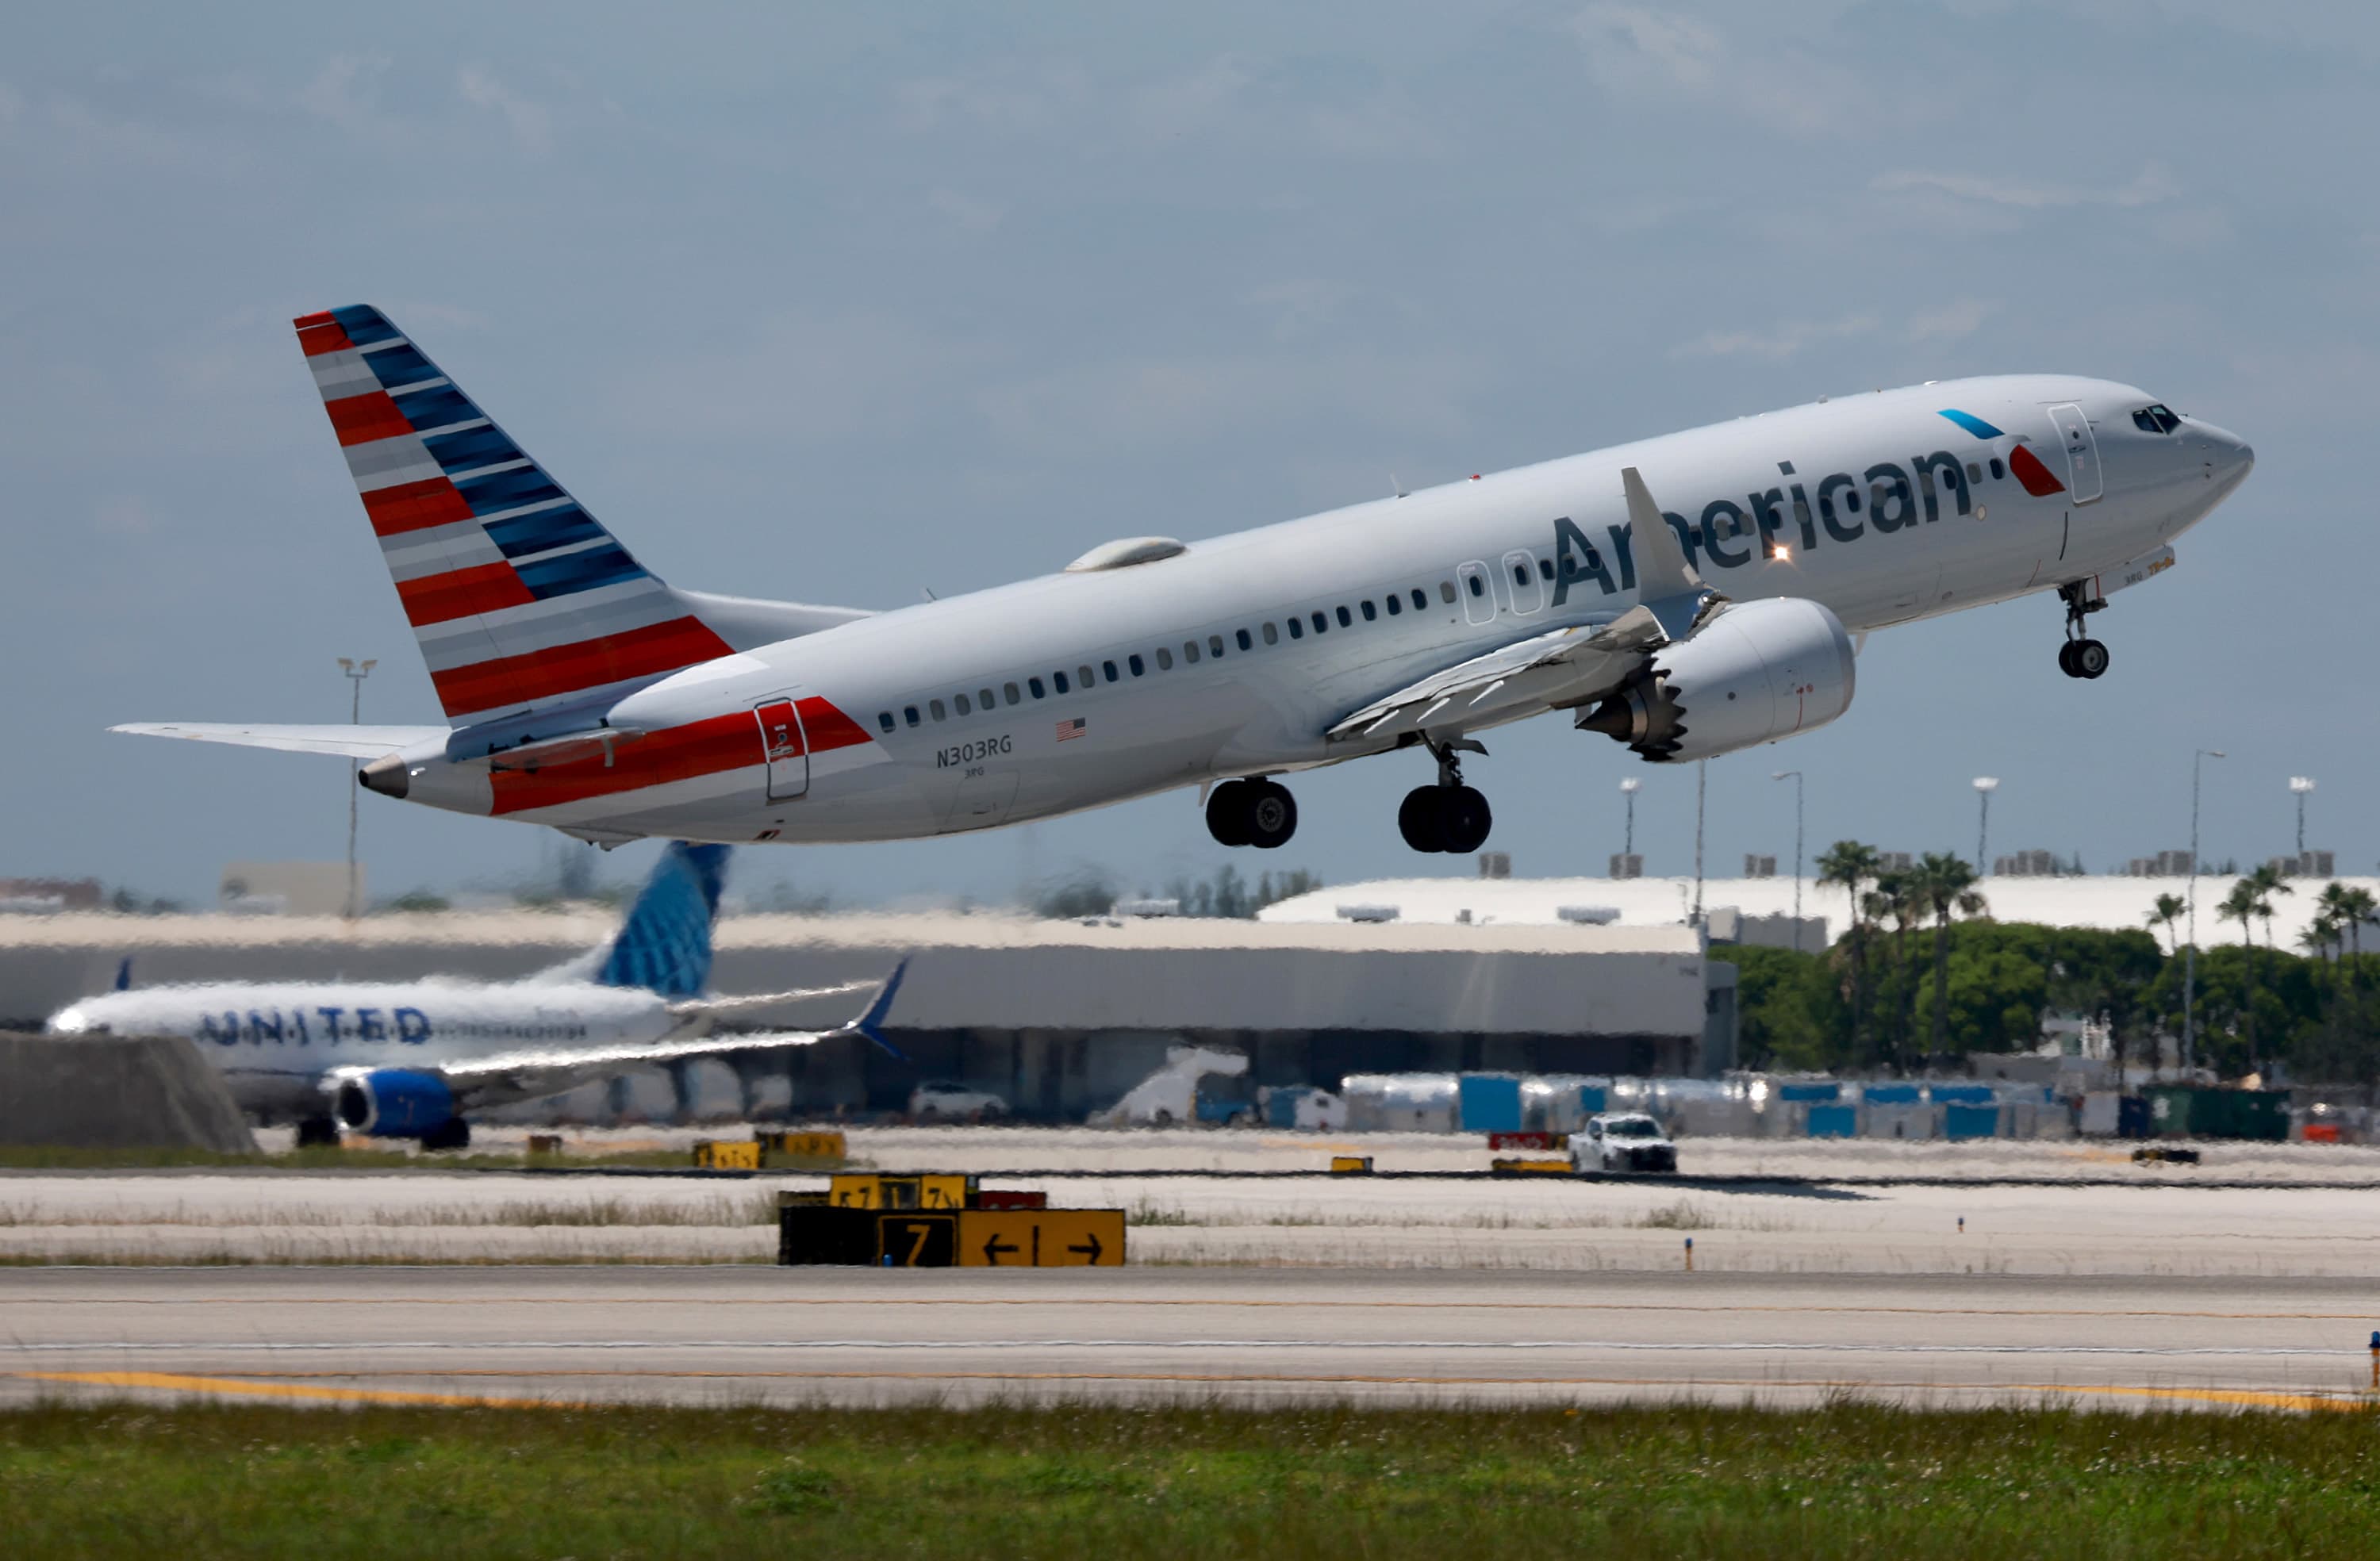 American Airlines boosts profit outlook on strong demand, cheaper fuel